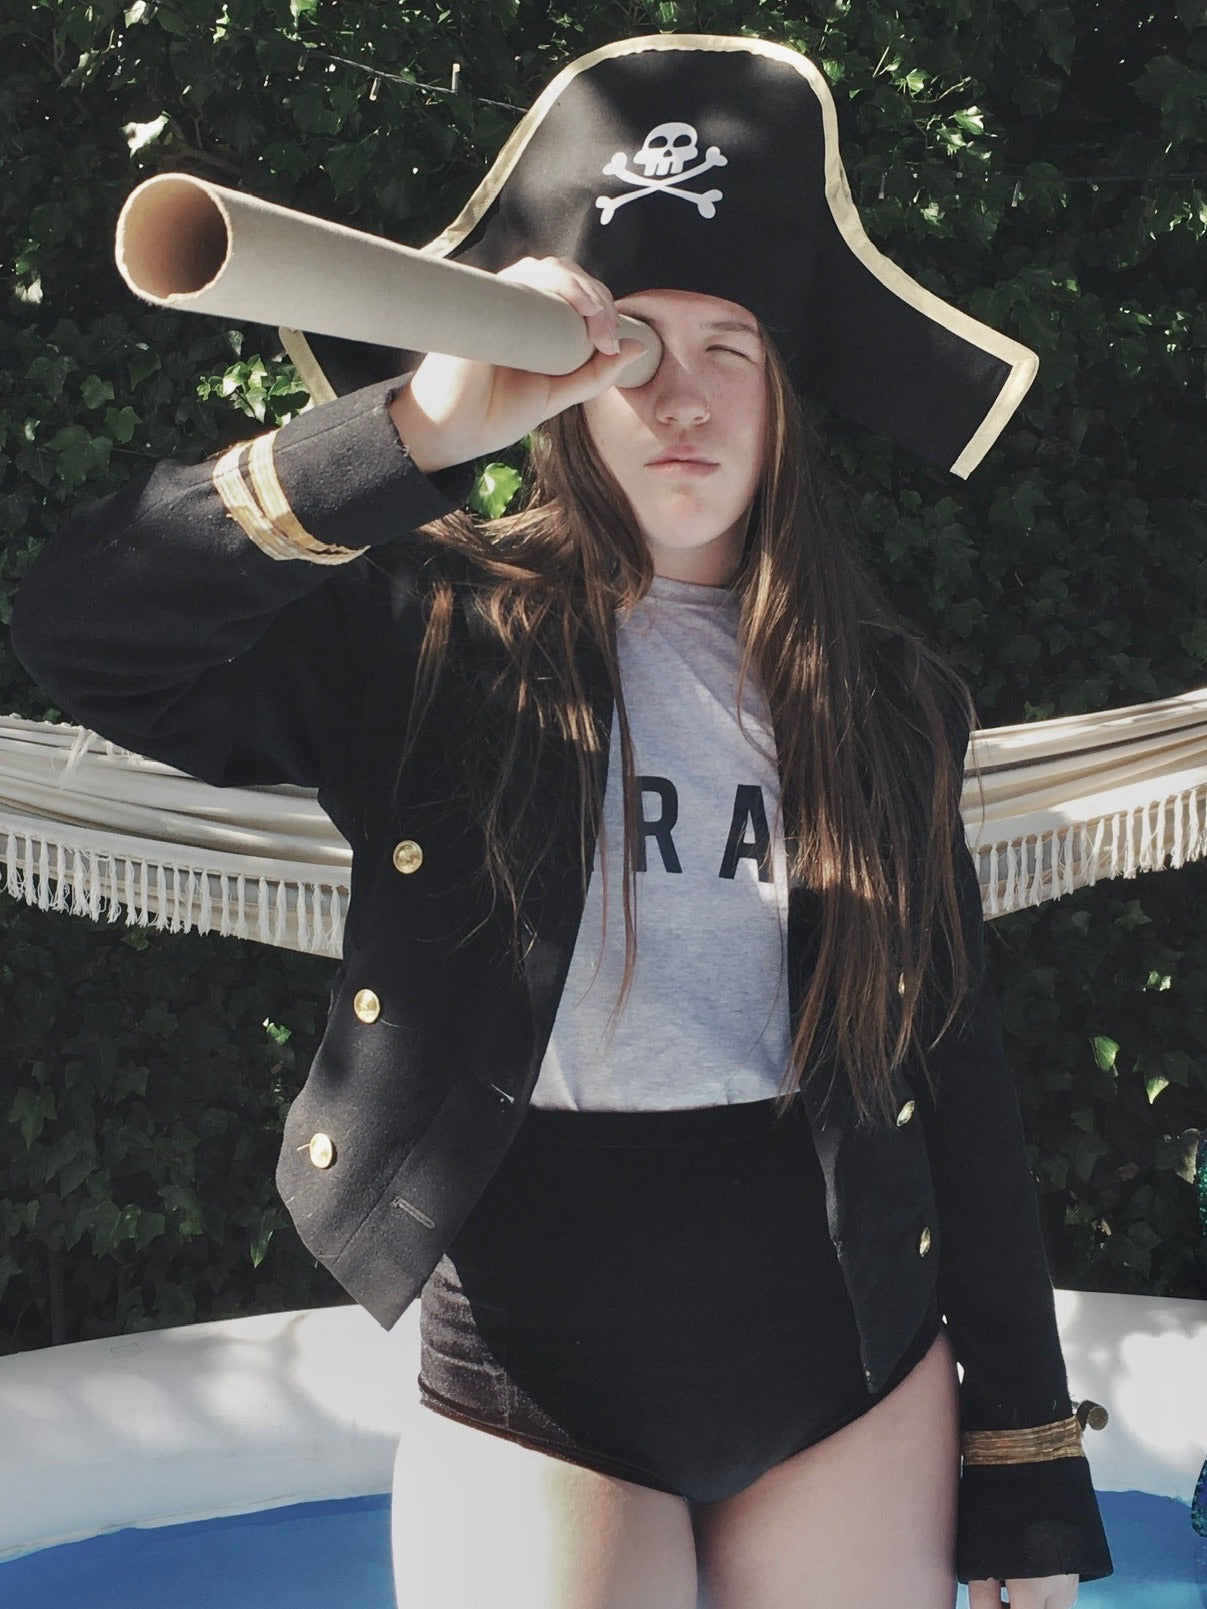 A girls wearing a pirate costume, holding a cardboard telescope to her eye